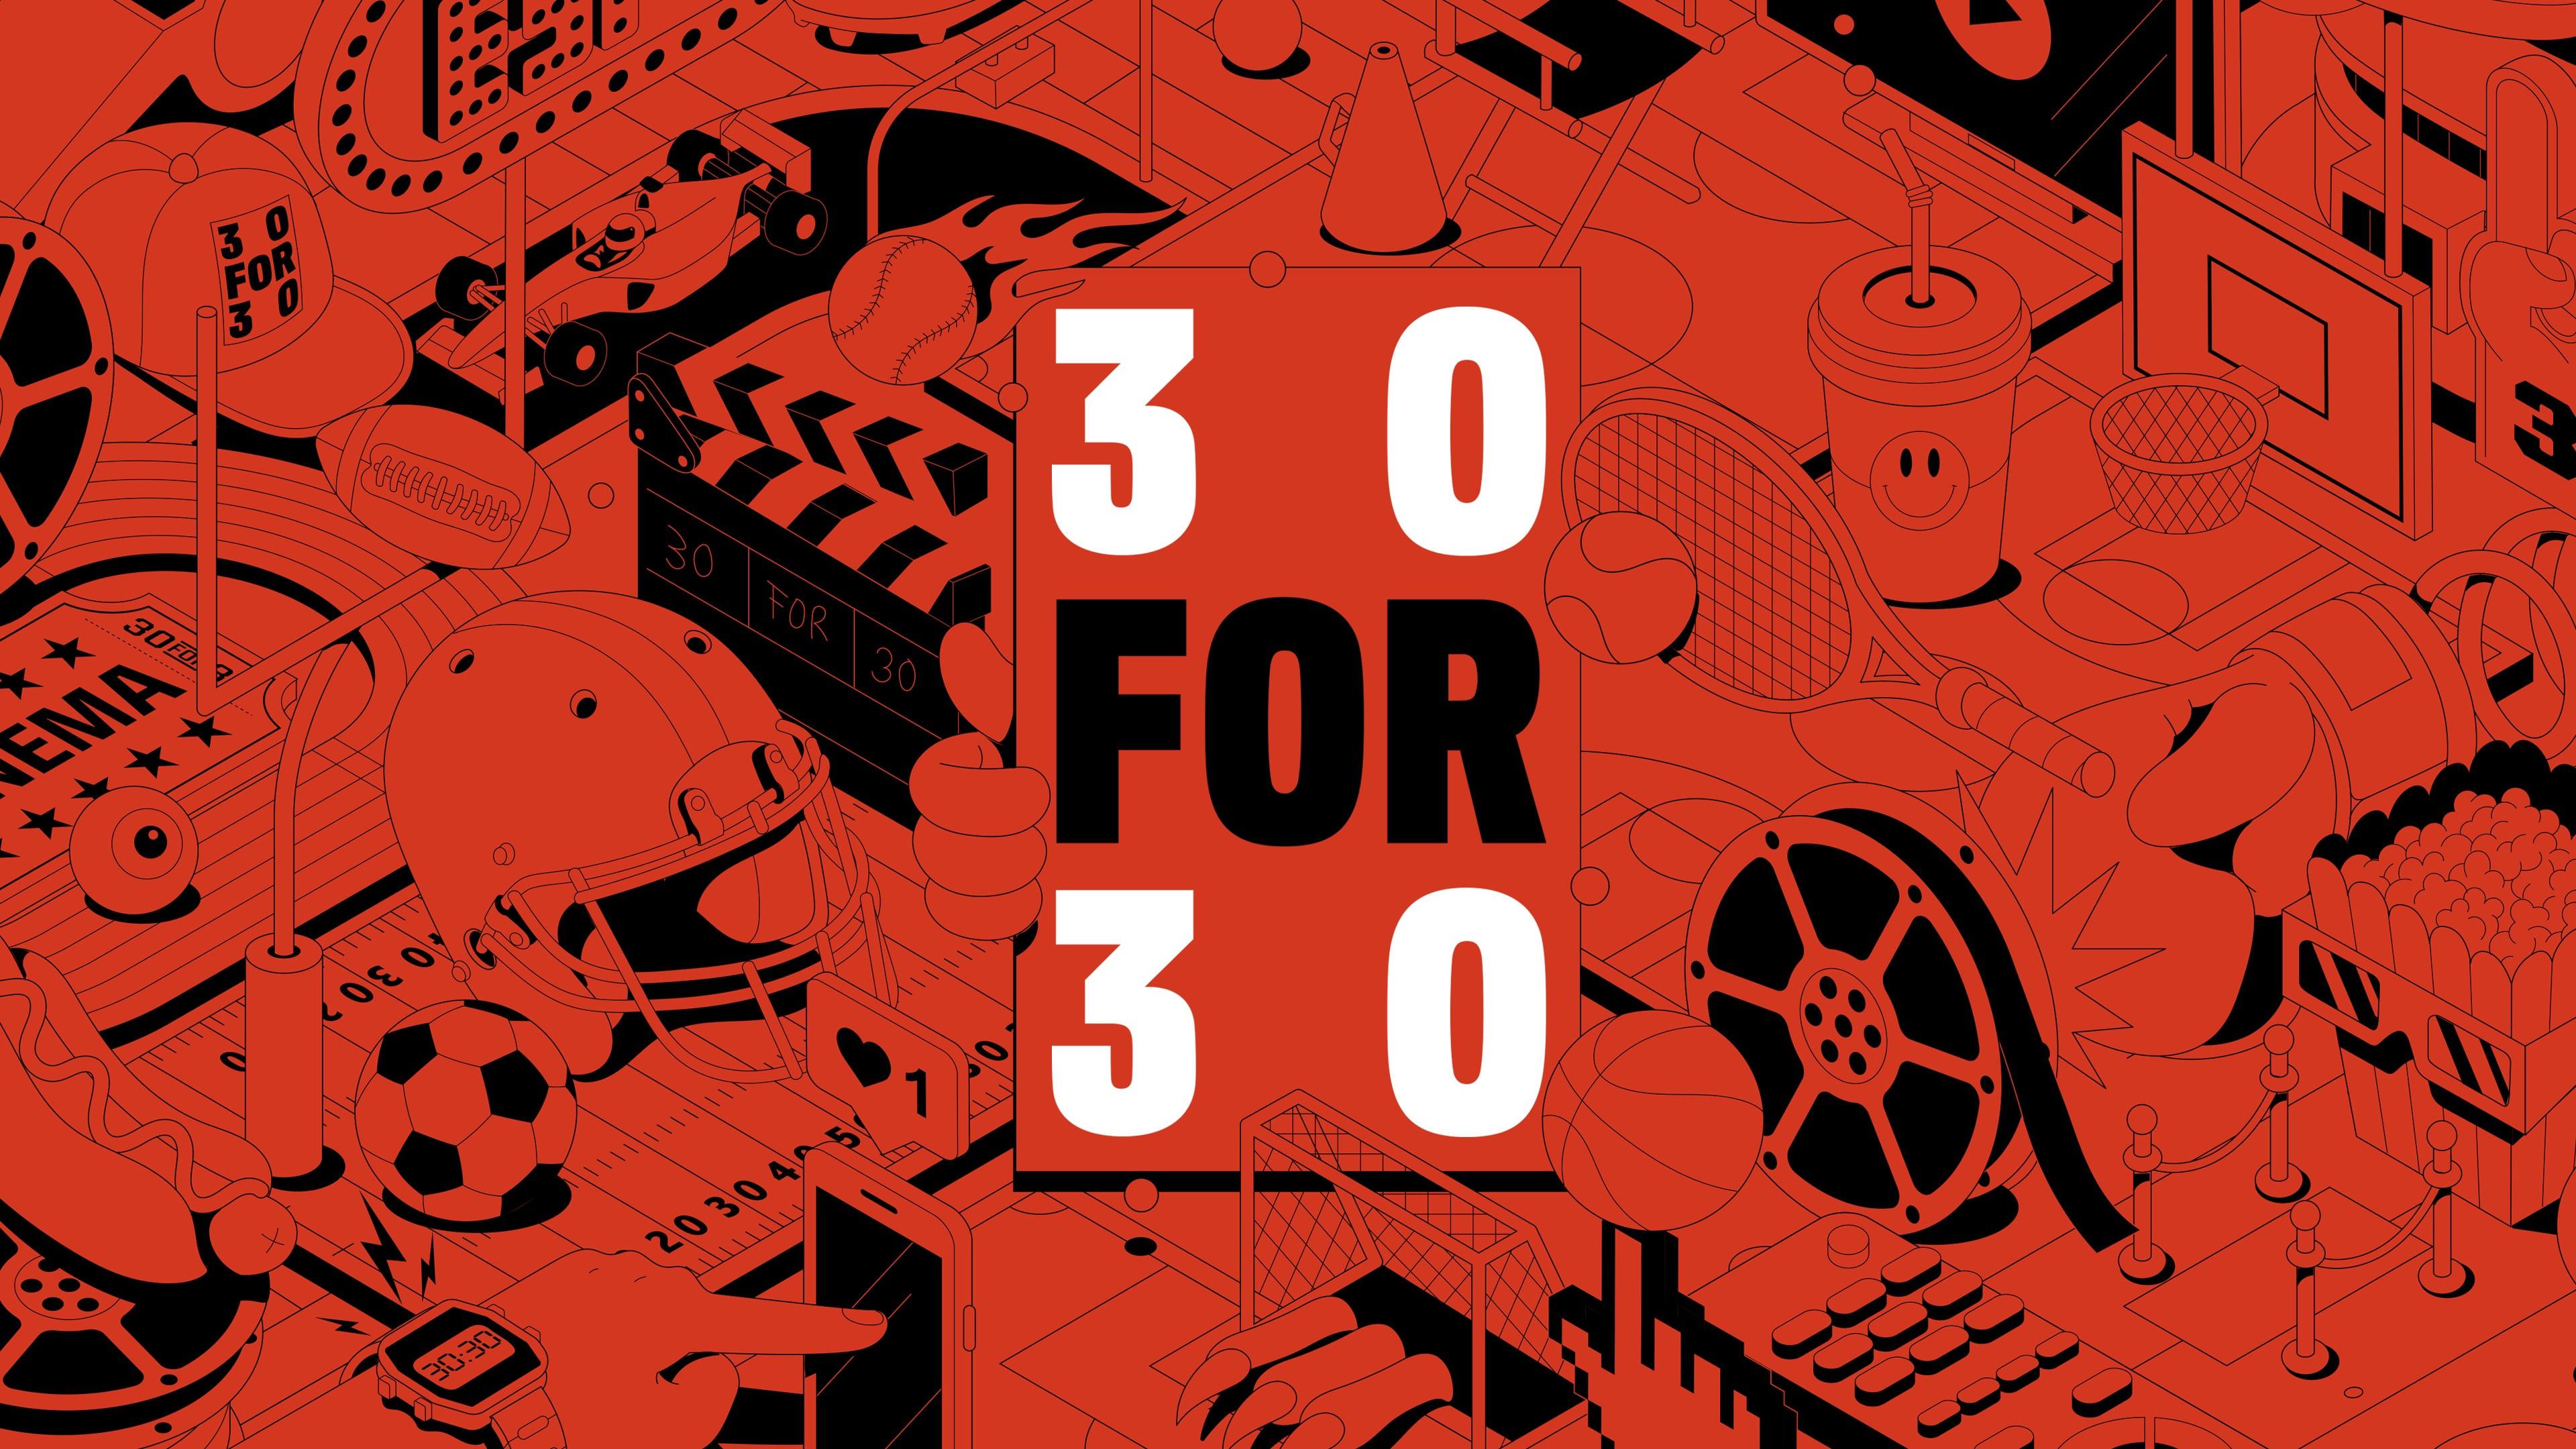 30 for 30 backdrop